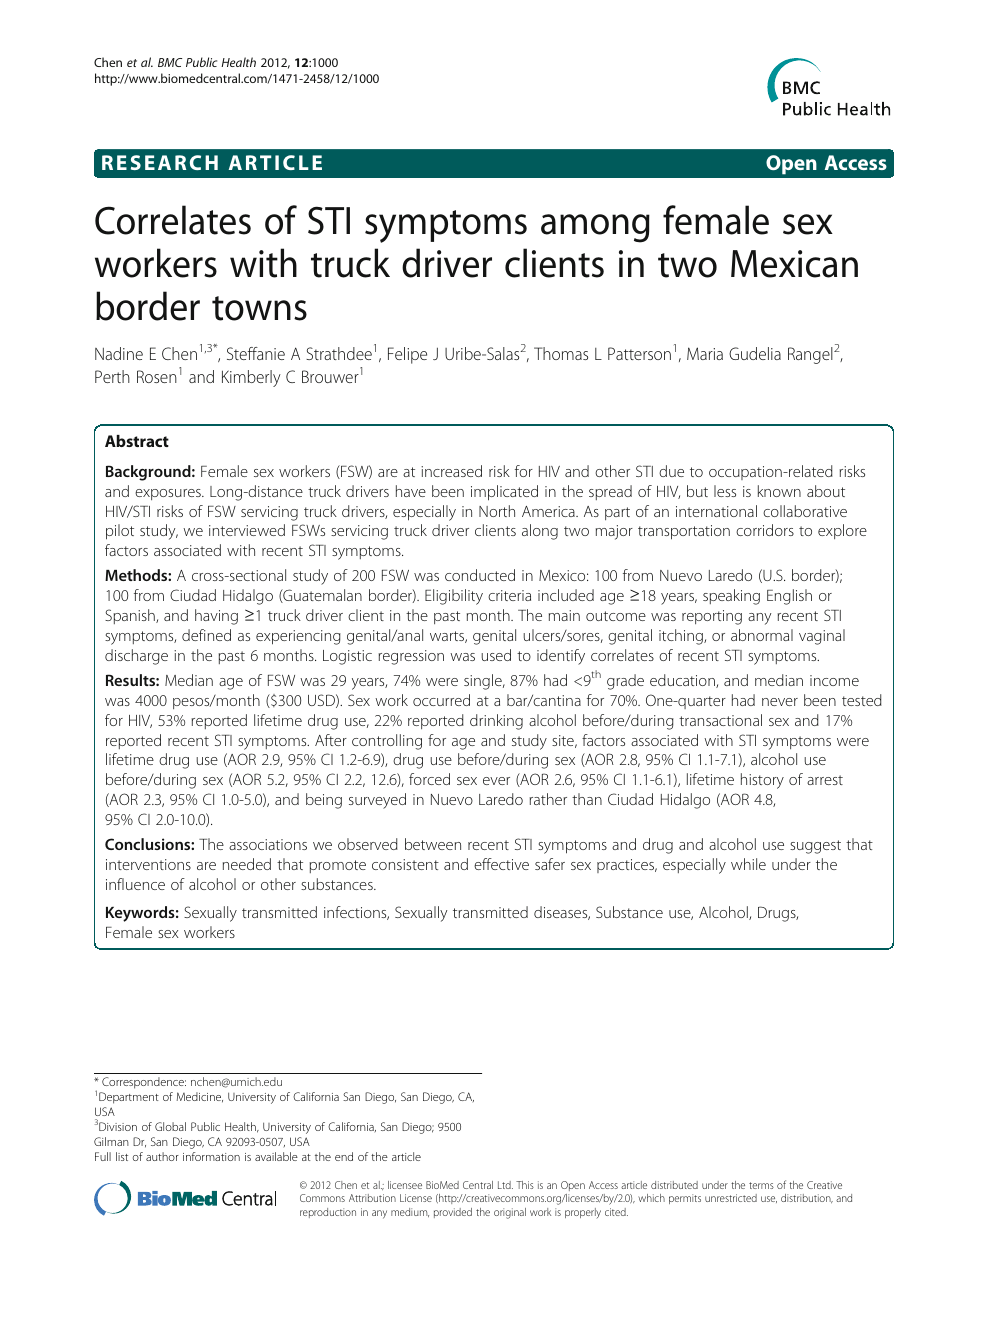 Correlates Of Sti Symptoms Among Female Sex Workers With Truck